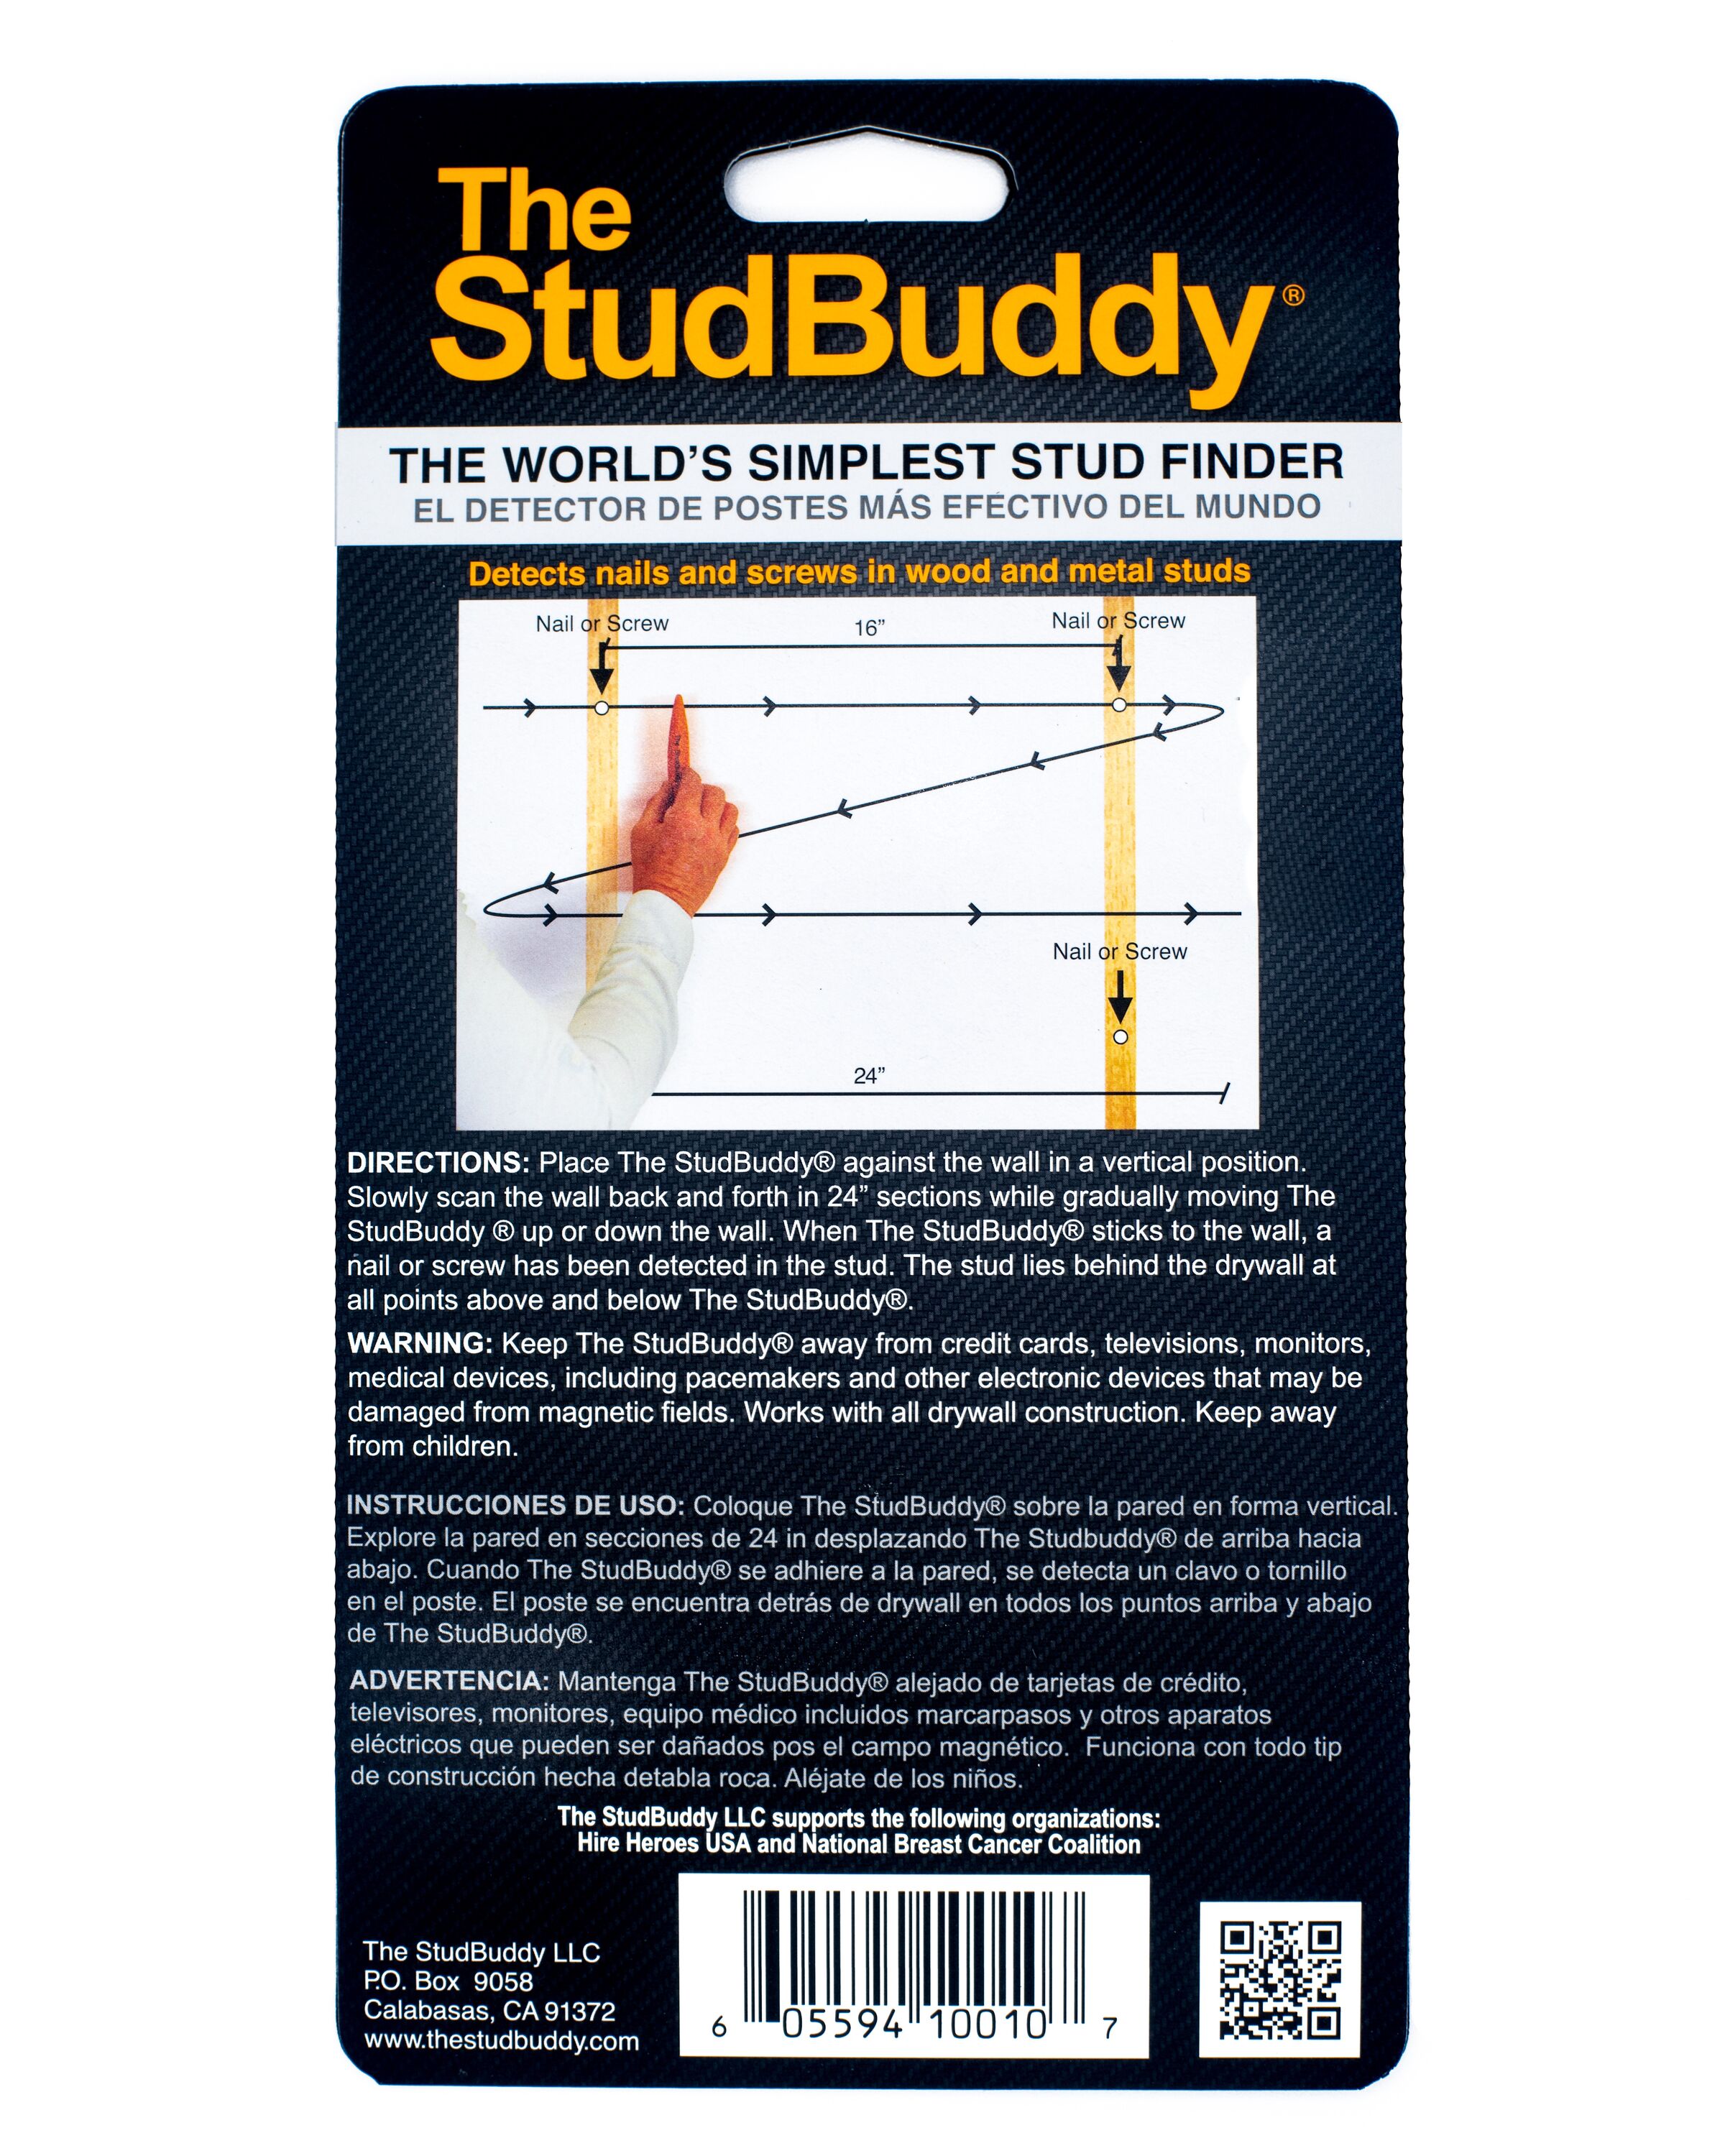 The StudBuddy Simplest Stud Finder for Metal and Wood Studs - Made